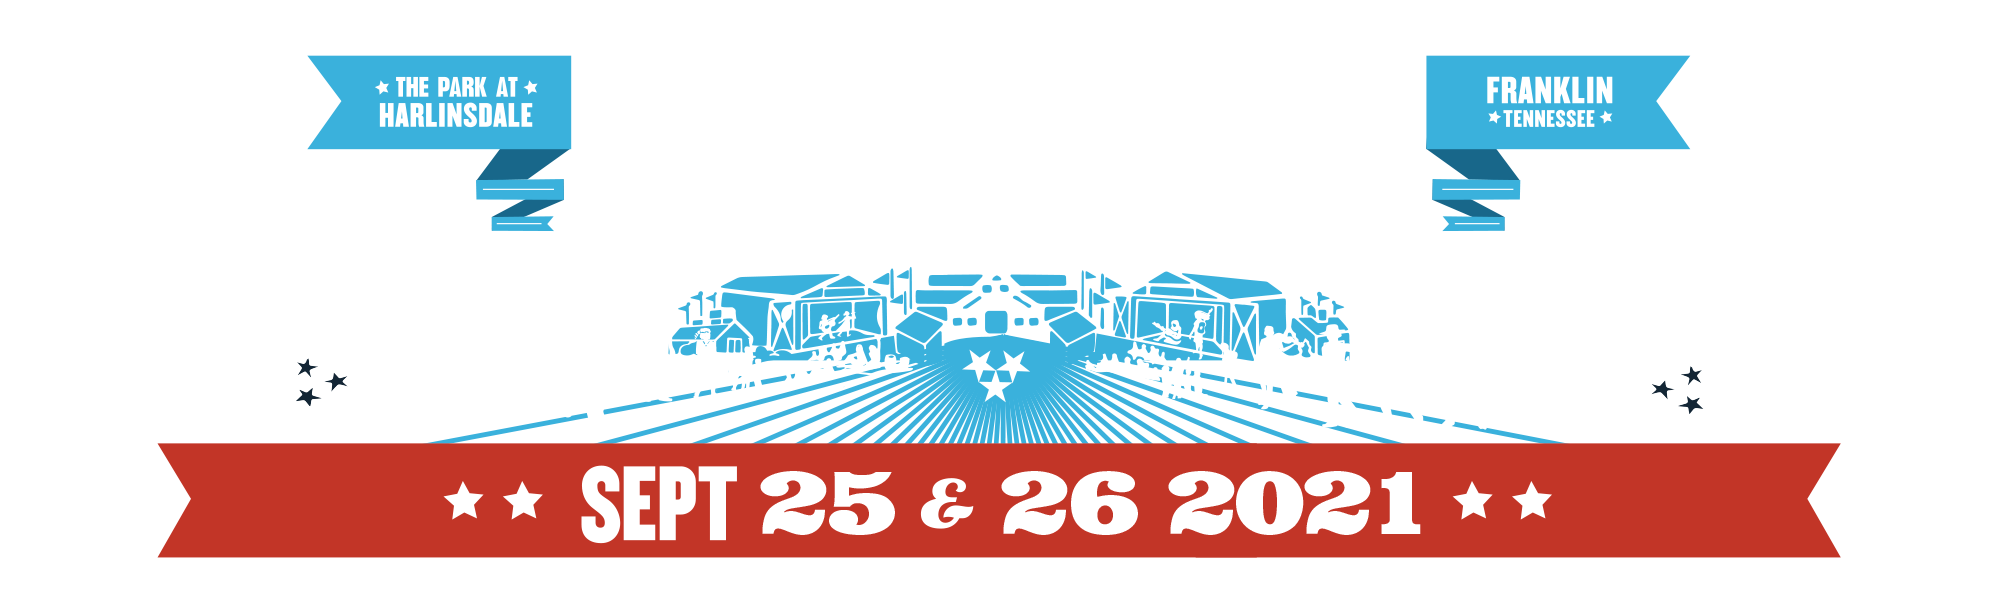 2022 Pilgrimage Music and Cultural Festival